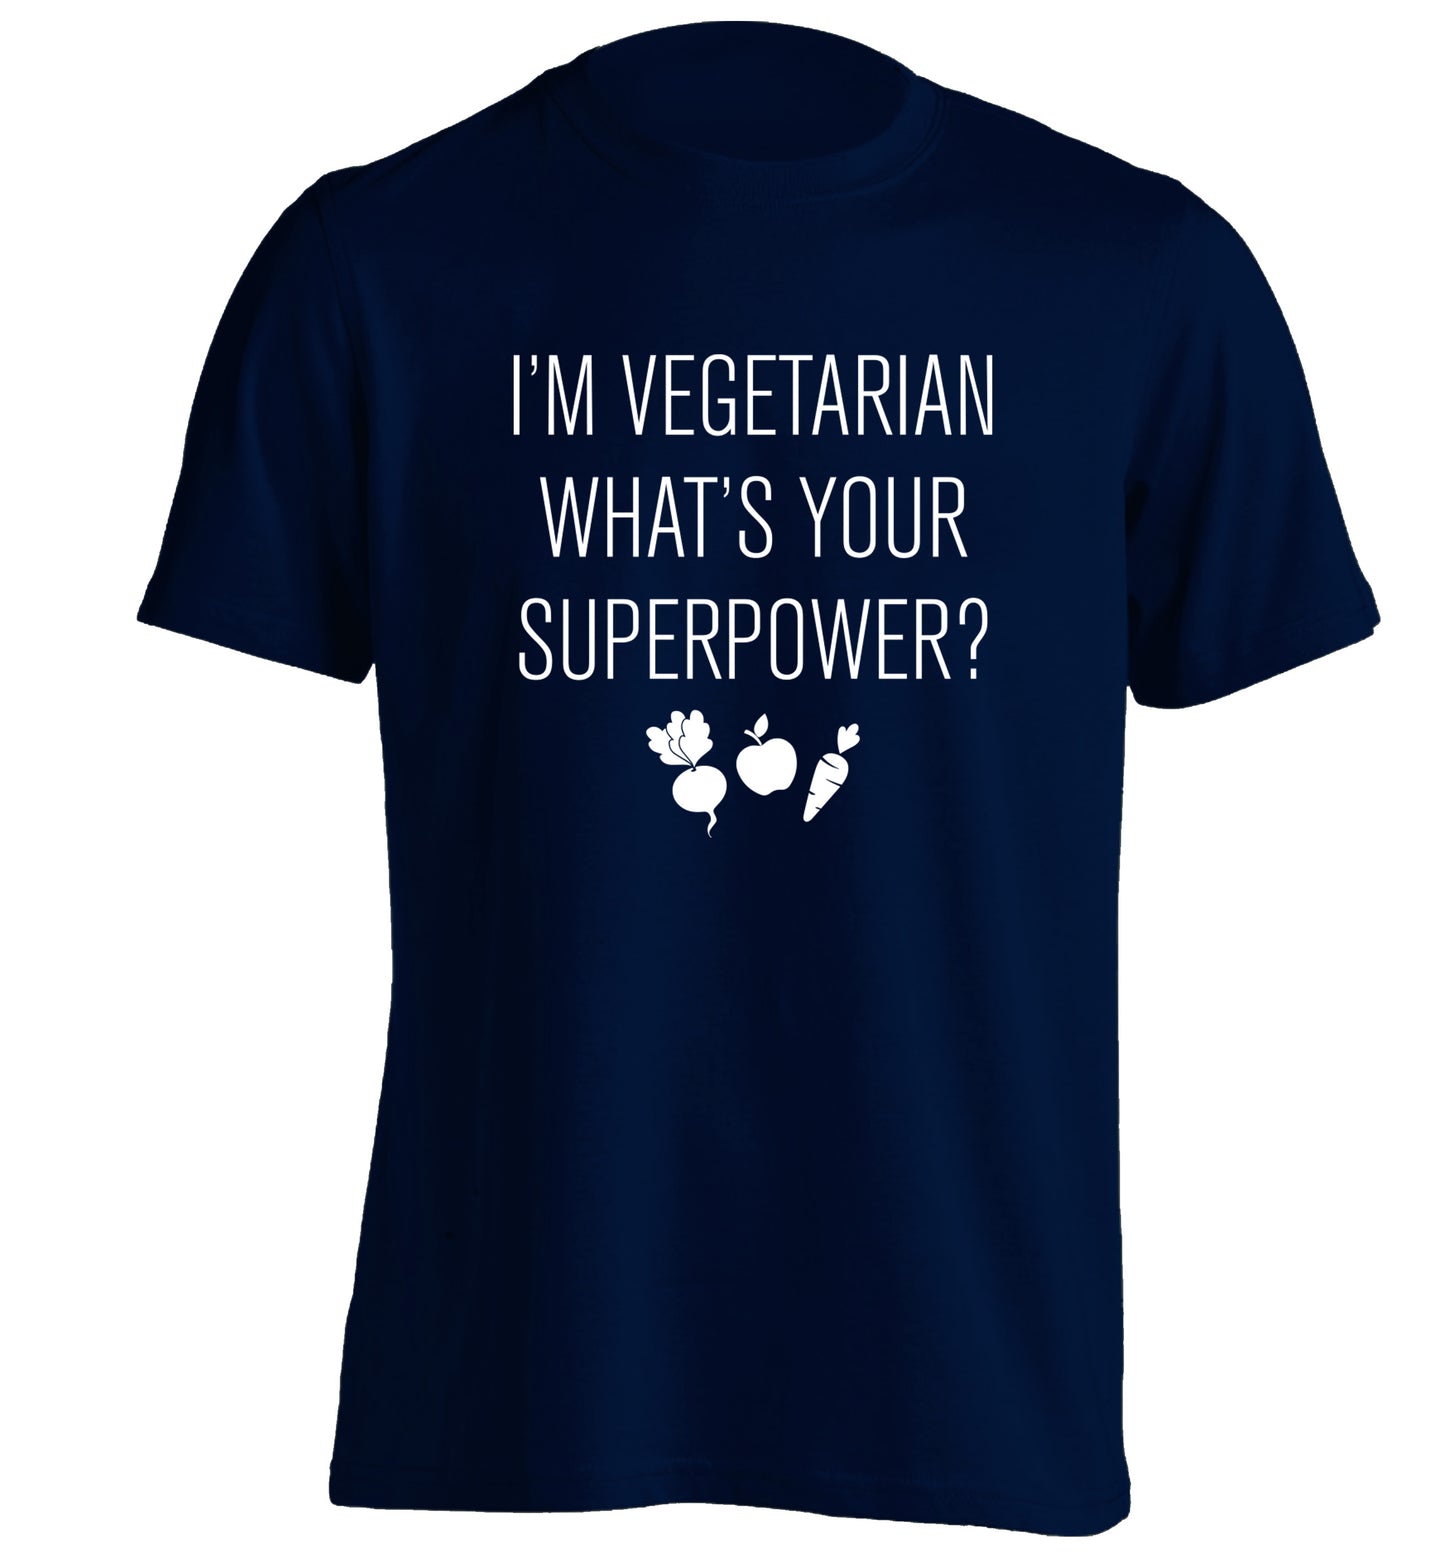 I'm vegetarian what's your superpower? adults unisex navy Tshirt 2XL